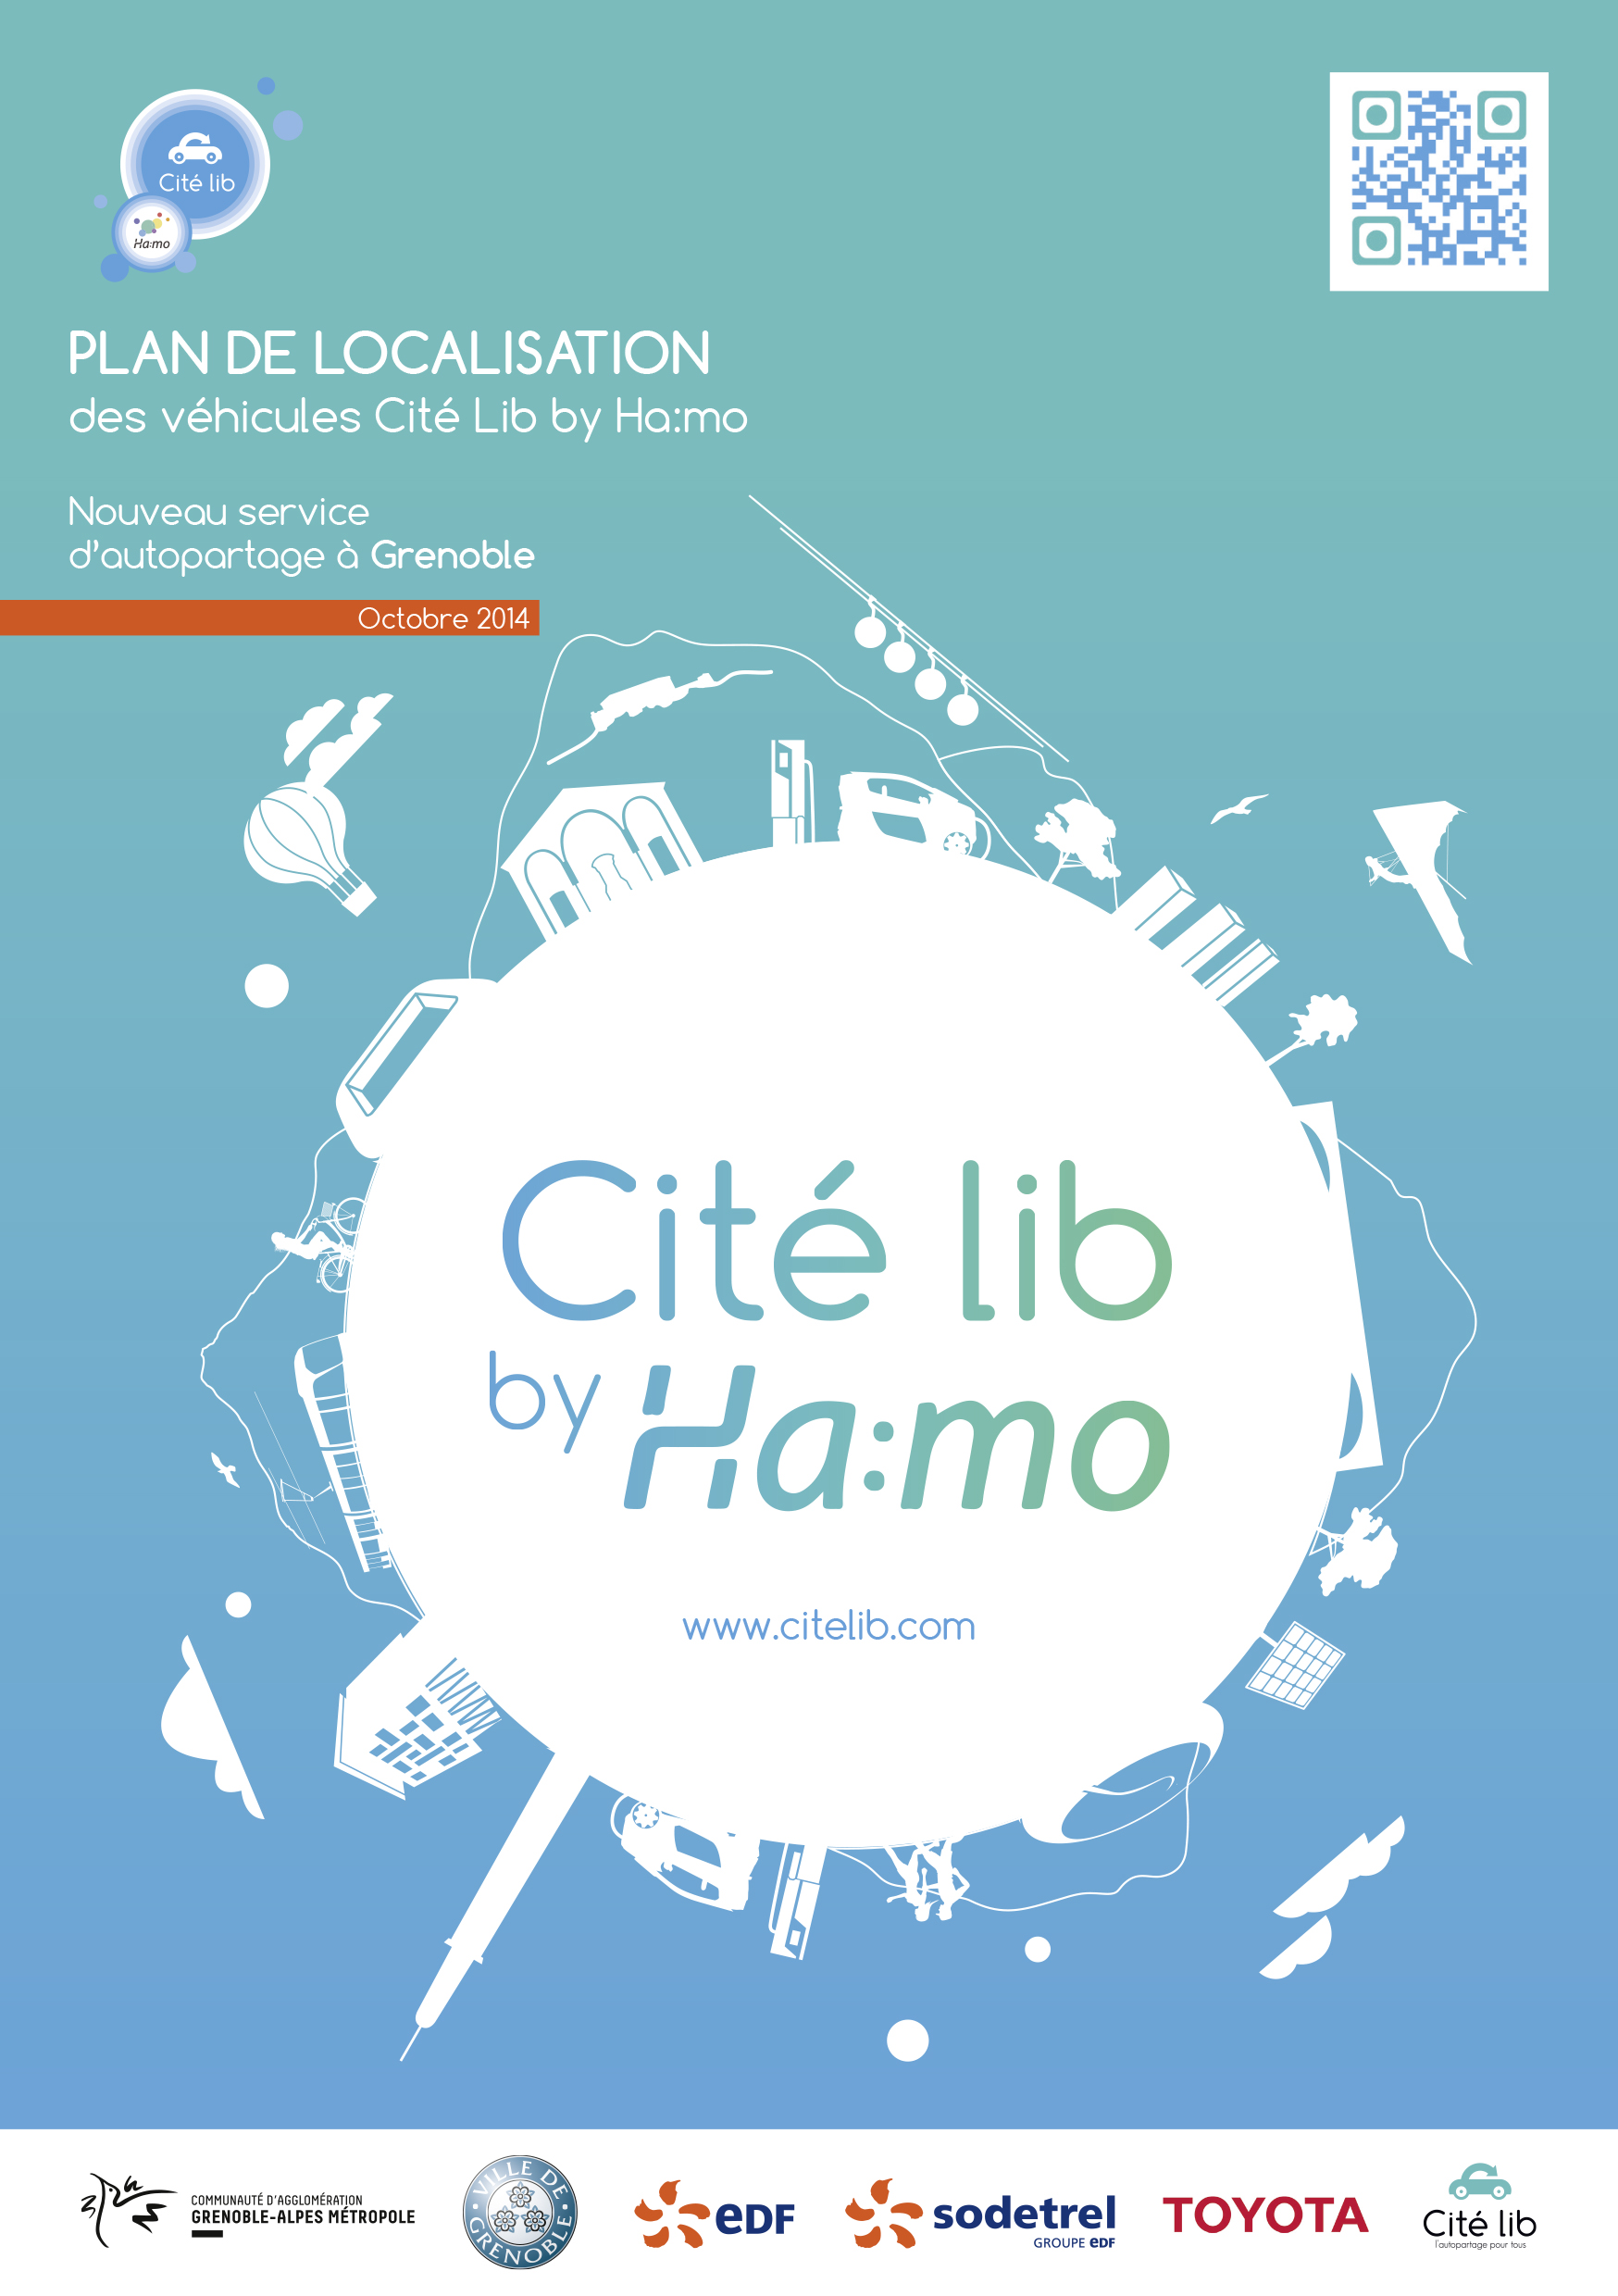 2014 Citélib by Ha:mo in Grenoble with i-Road / COMS